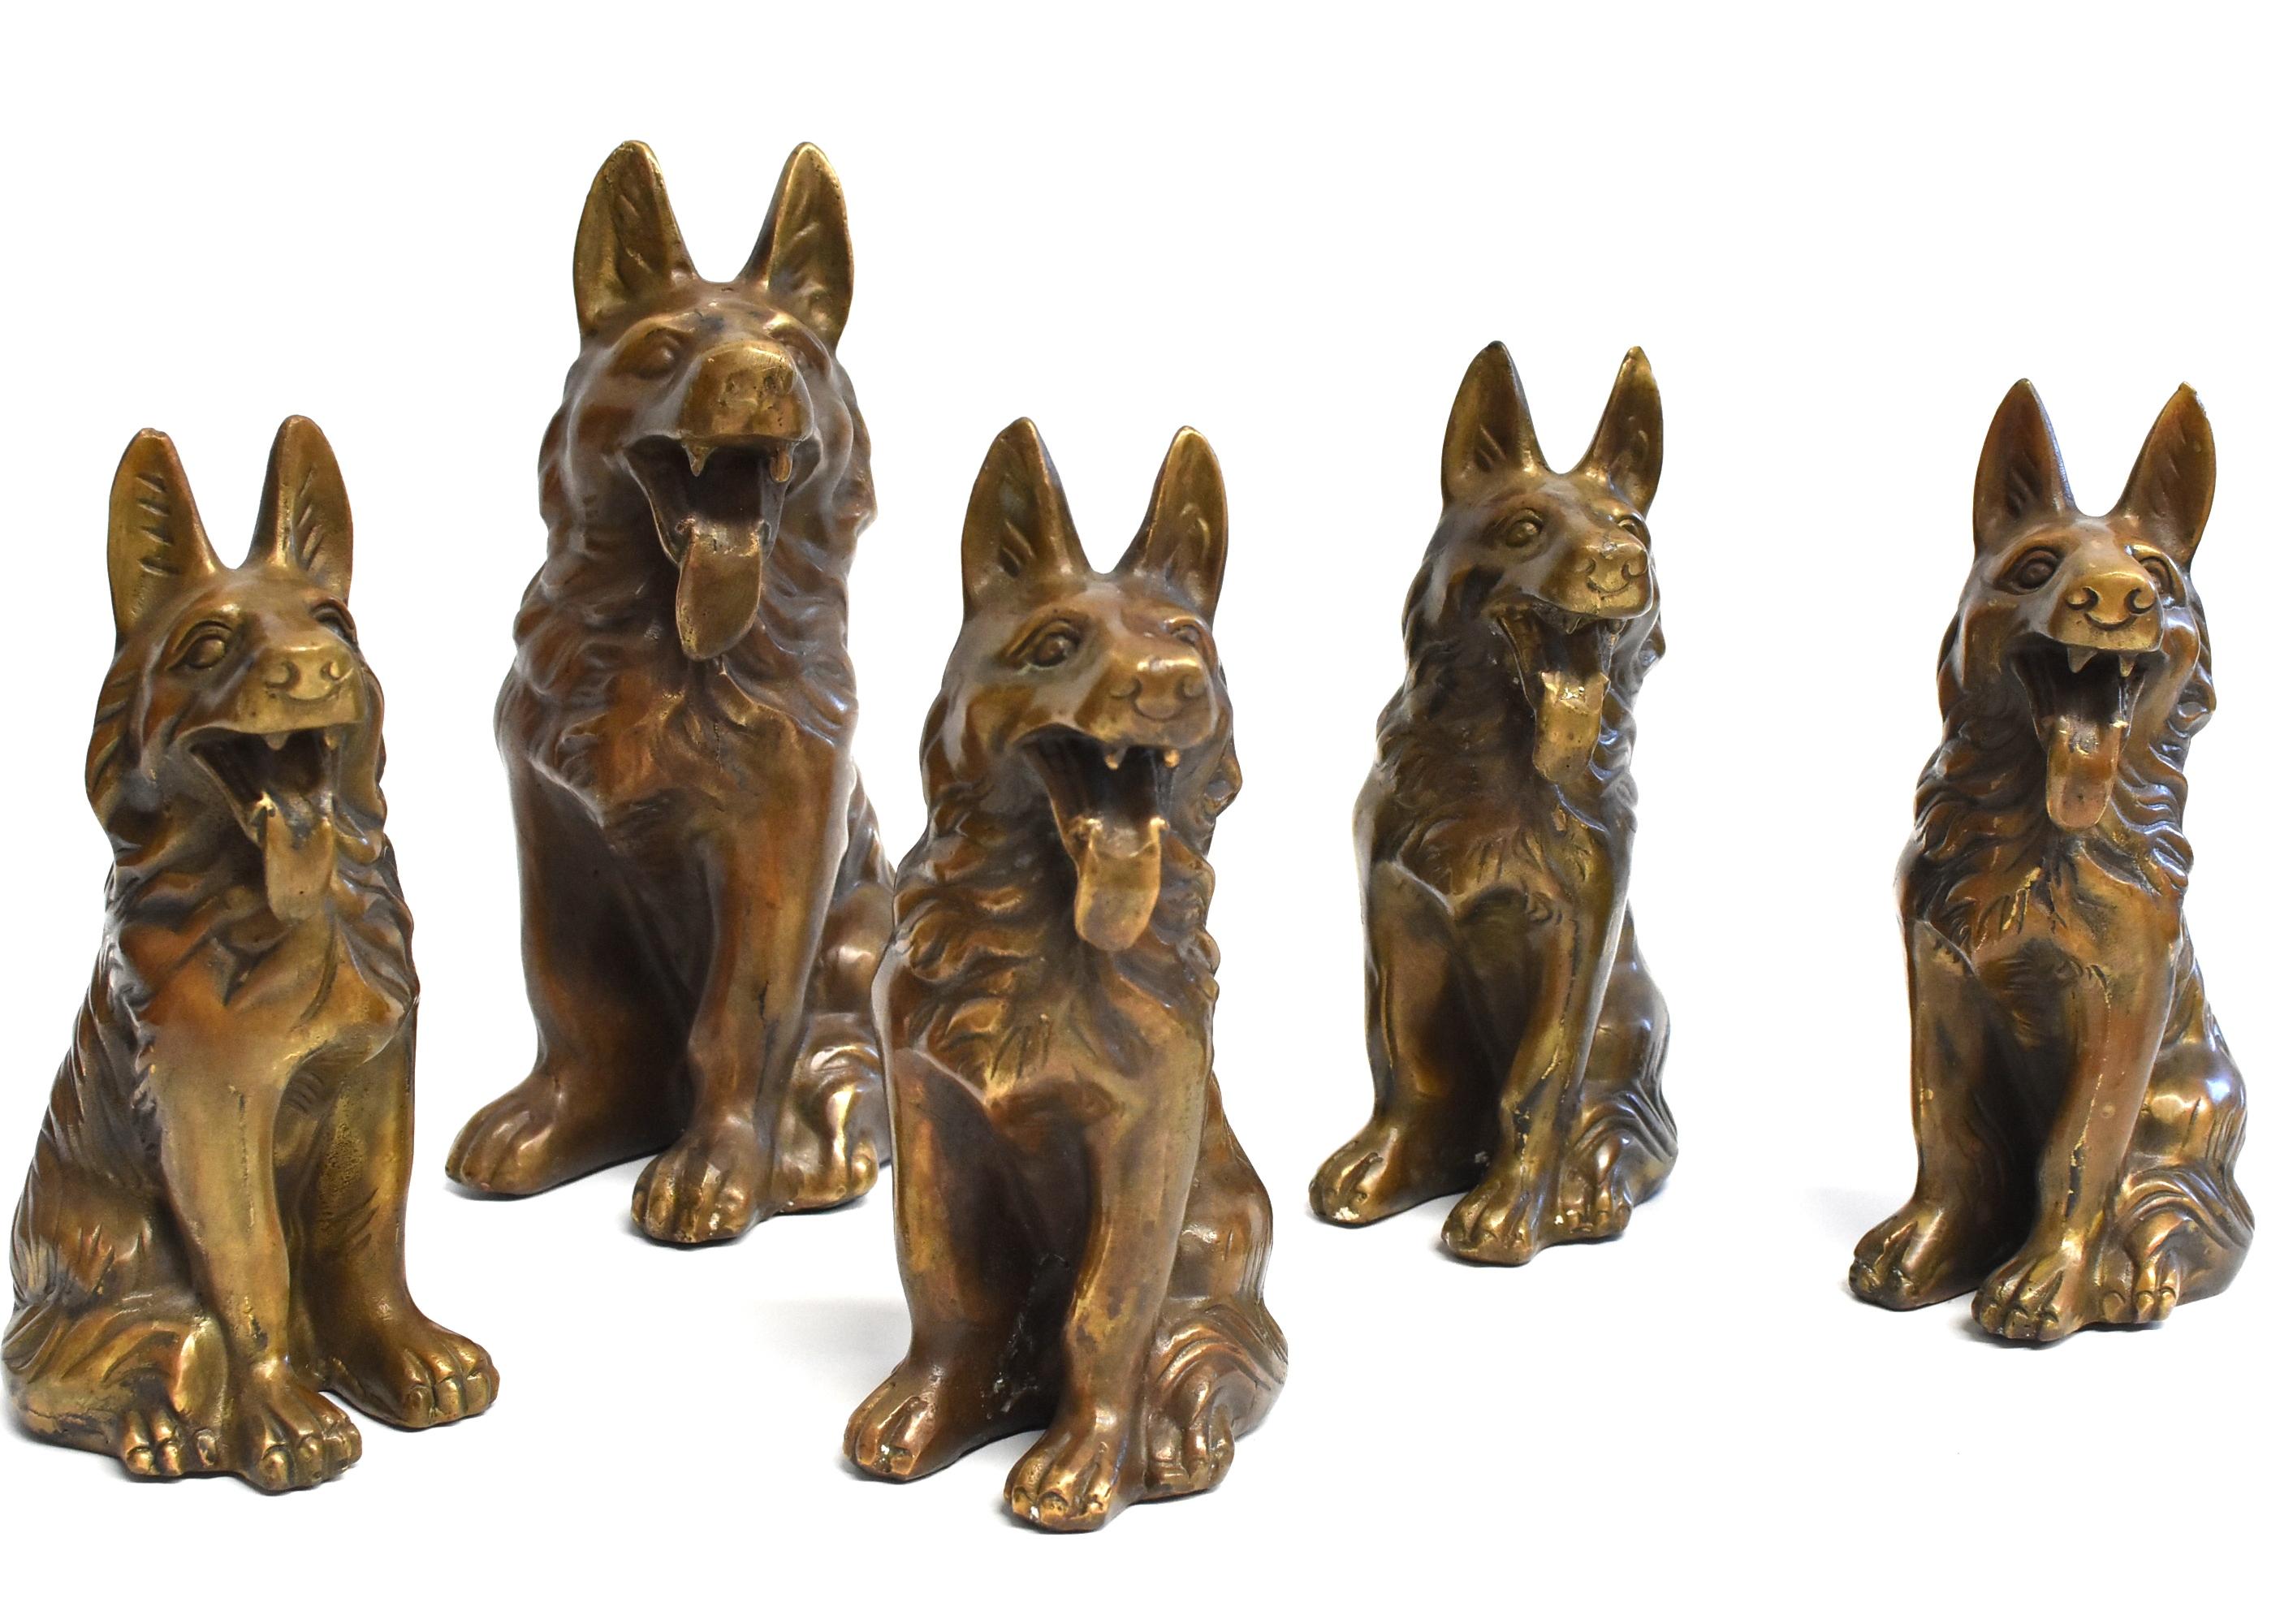 A wonderful set of brass dogs, German Shepherds. Vivid and expressive, with well defined facial features and hair. There are 1 large dog and 4 medium size dogs. These pieces are great as a groups of sculptures and paperweights. Large: 5.25